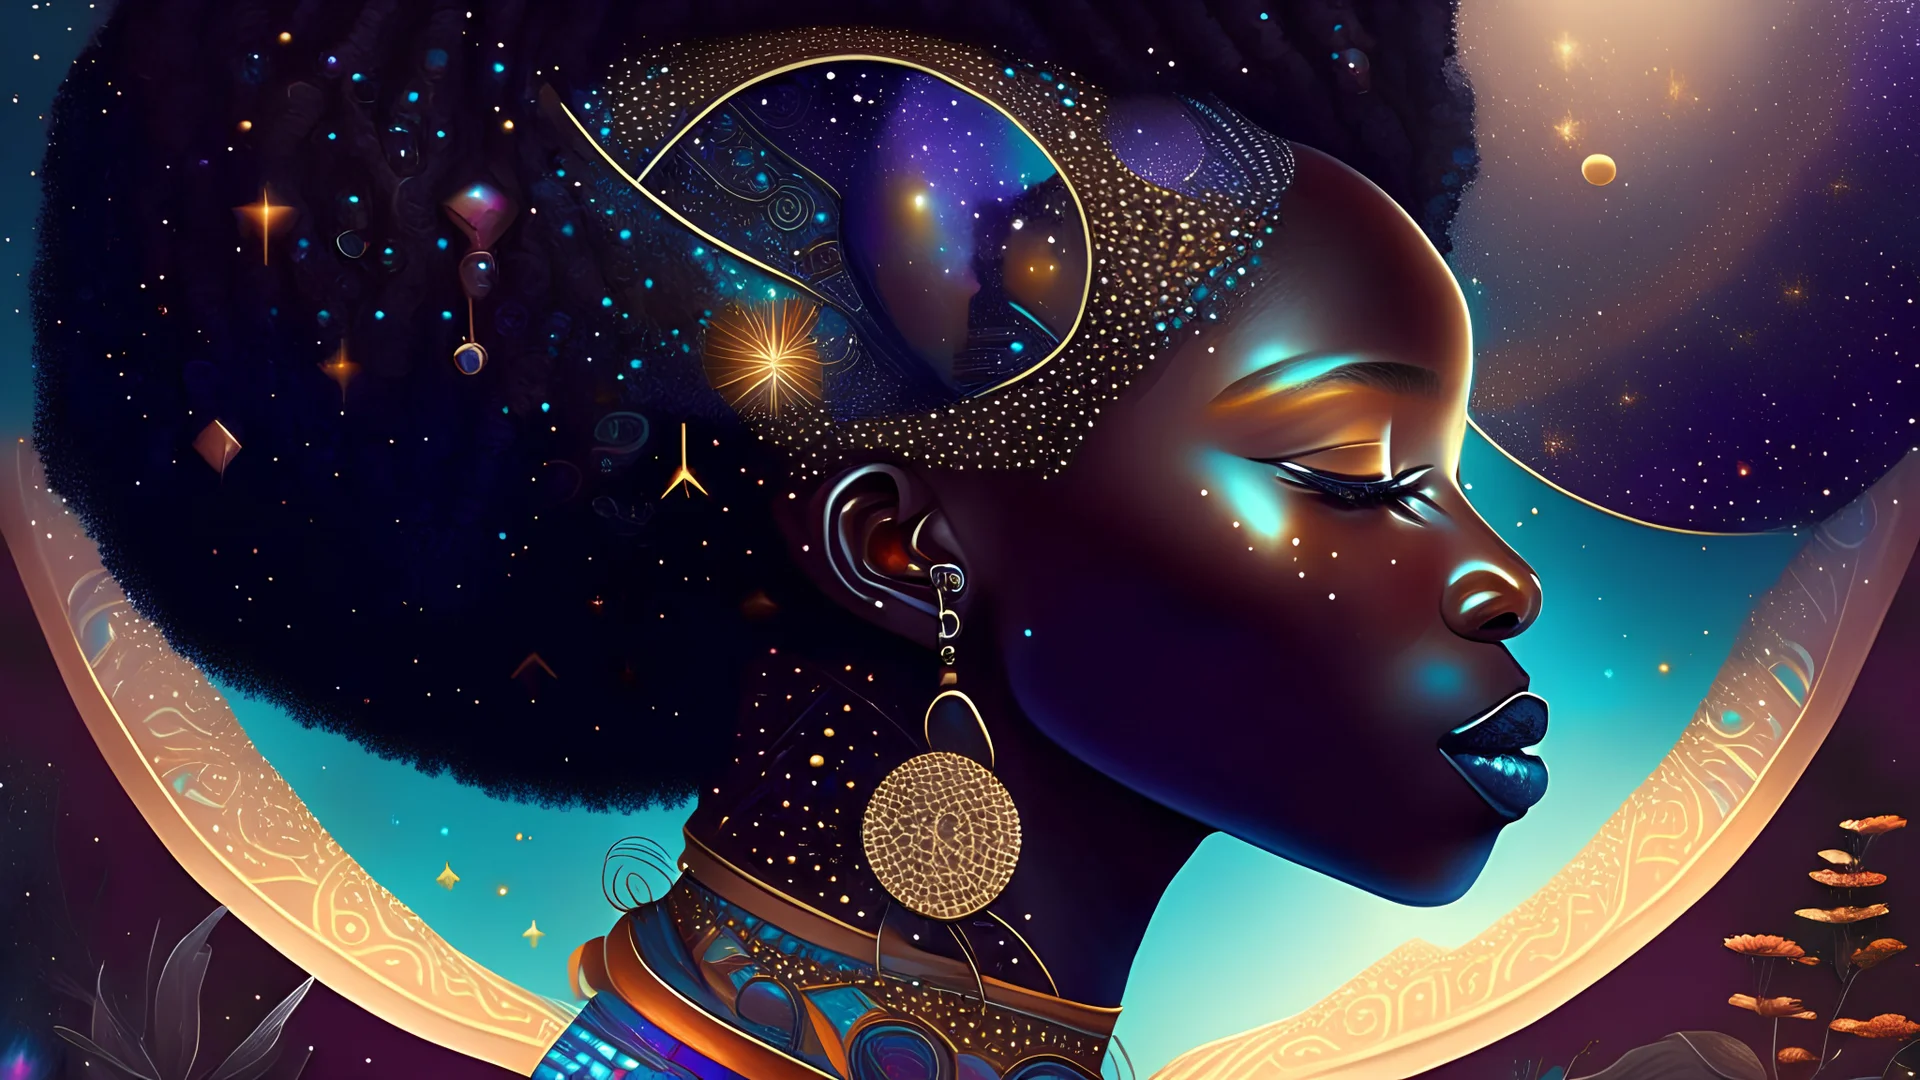 Craft an Afrofuturistic poetry collection that contemplates the relationship between humanity, the cosmos, and African ancestry, offering a unique perspective on existential questions.